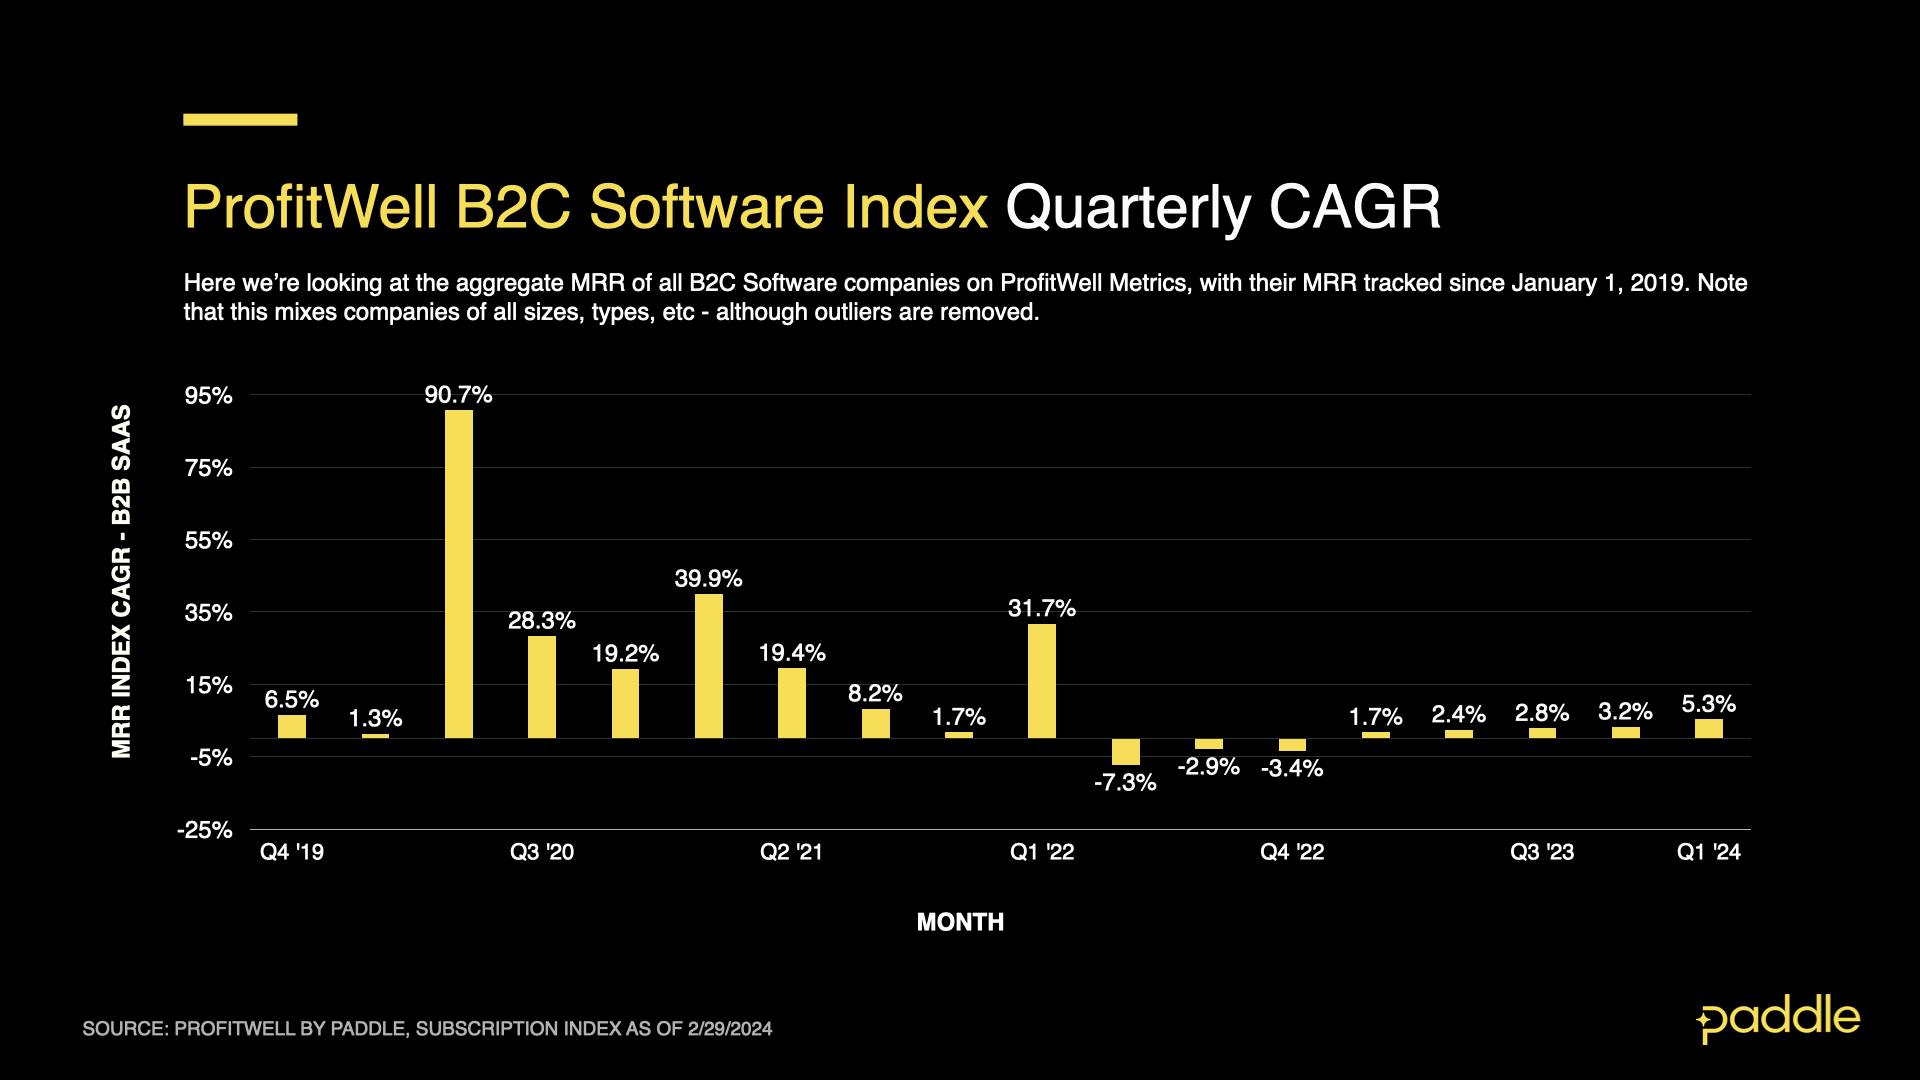 We predict quarterly CAGR for B2C to end at 5.3% for Q1 2024. 